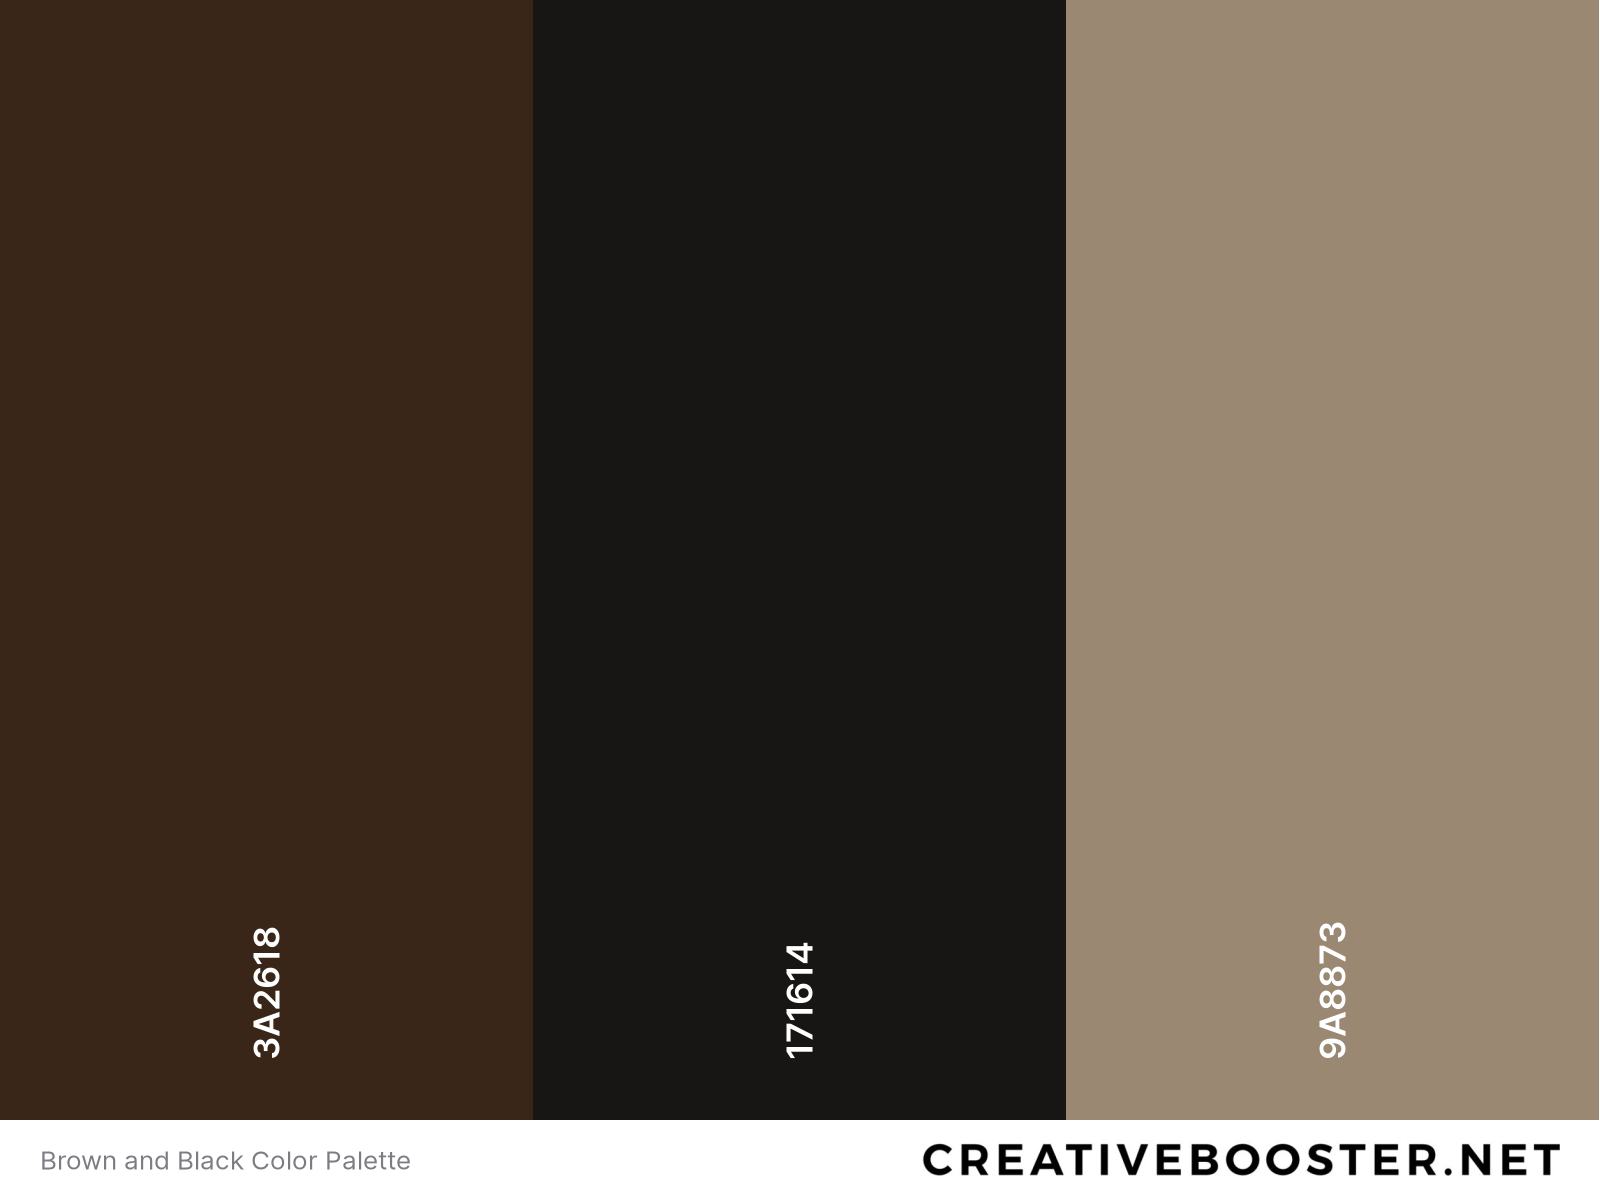 Brown and Black Color Palette